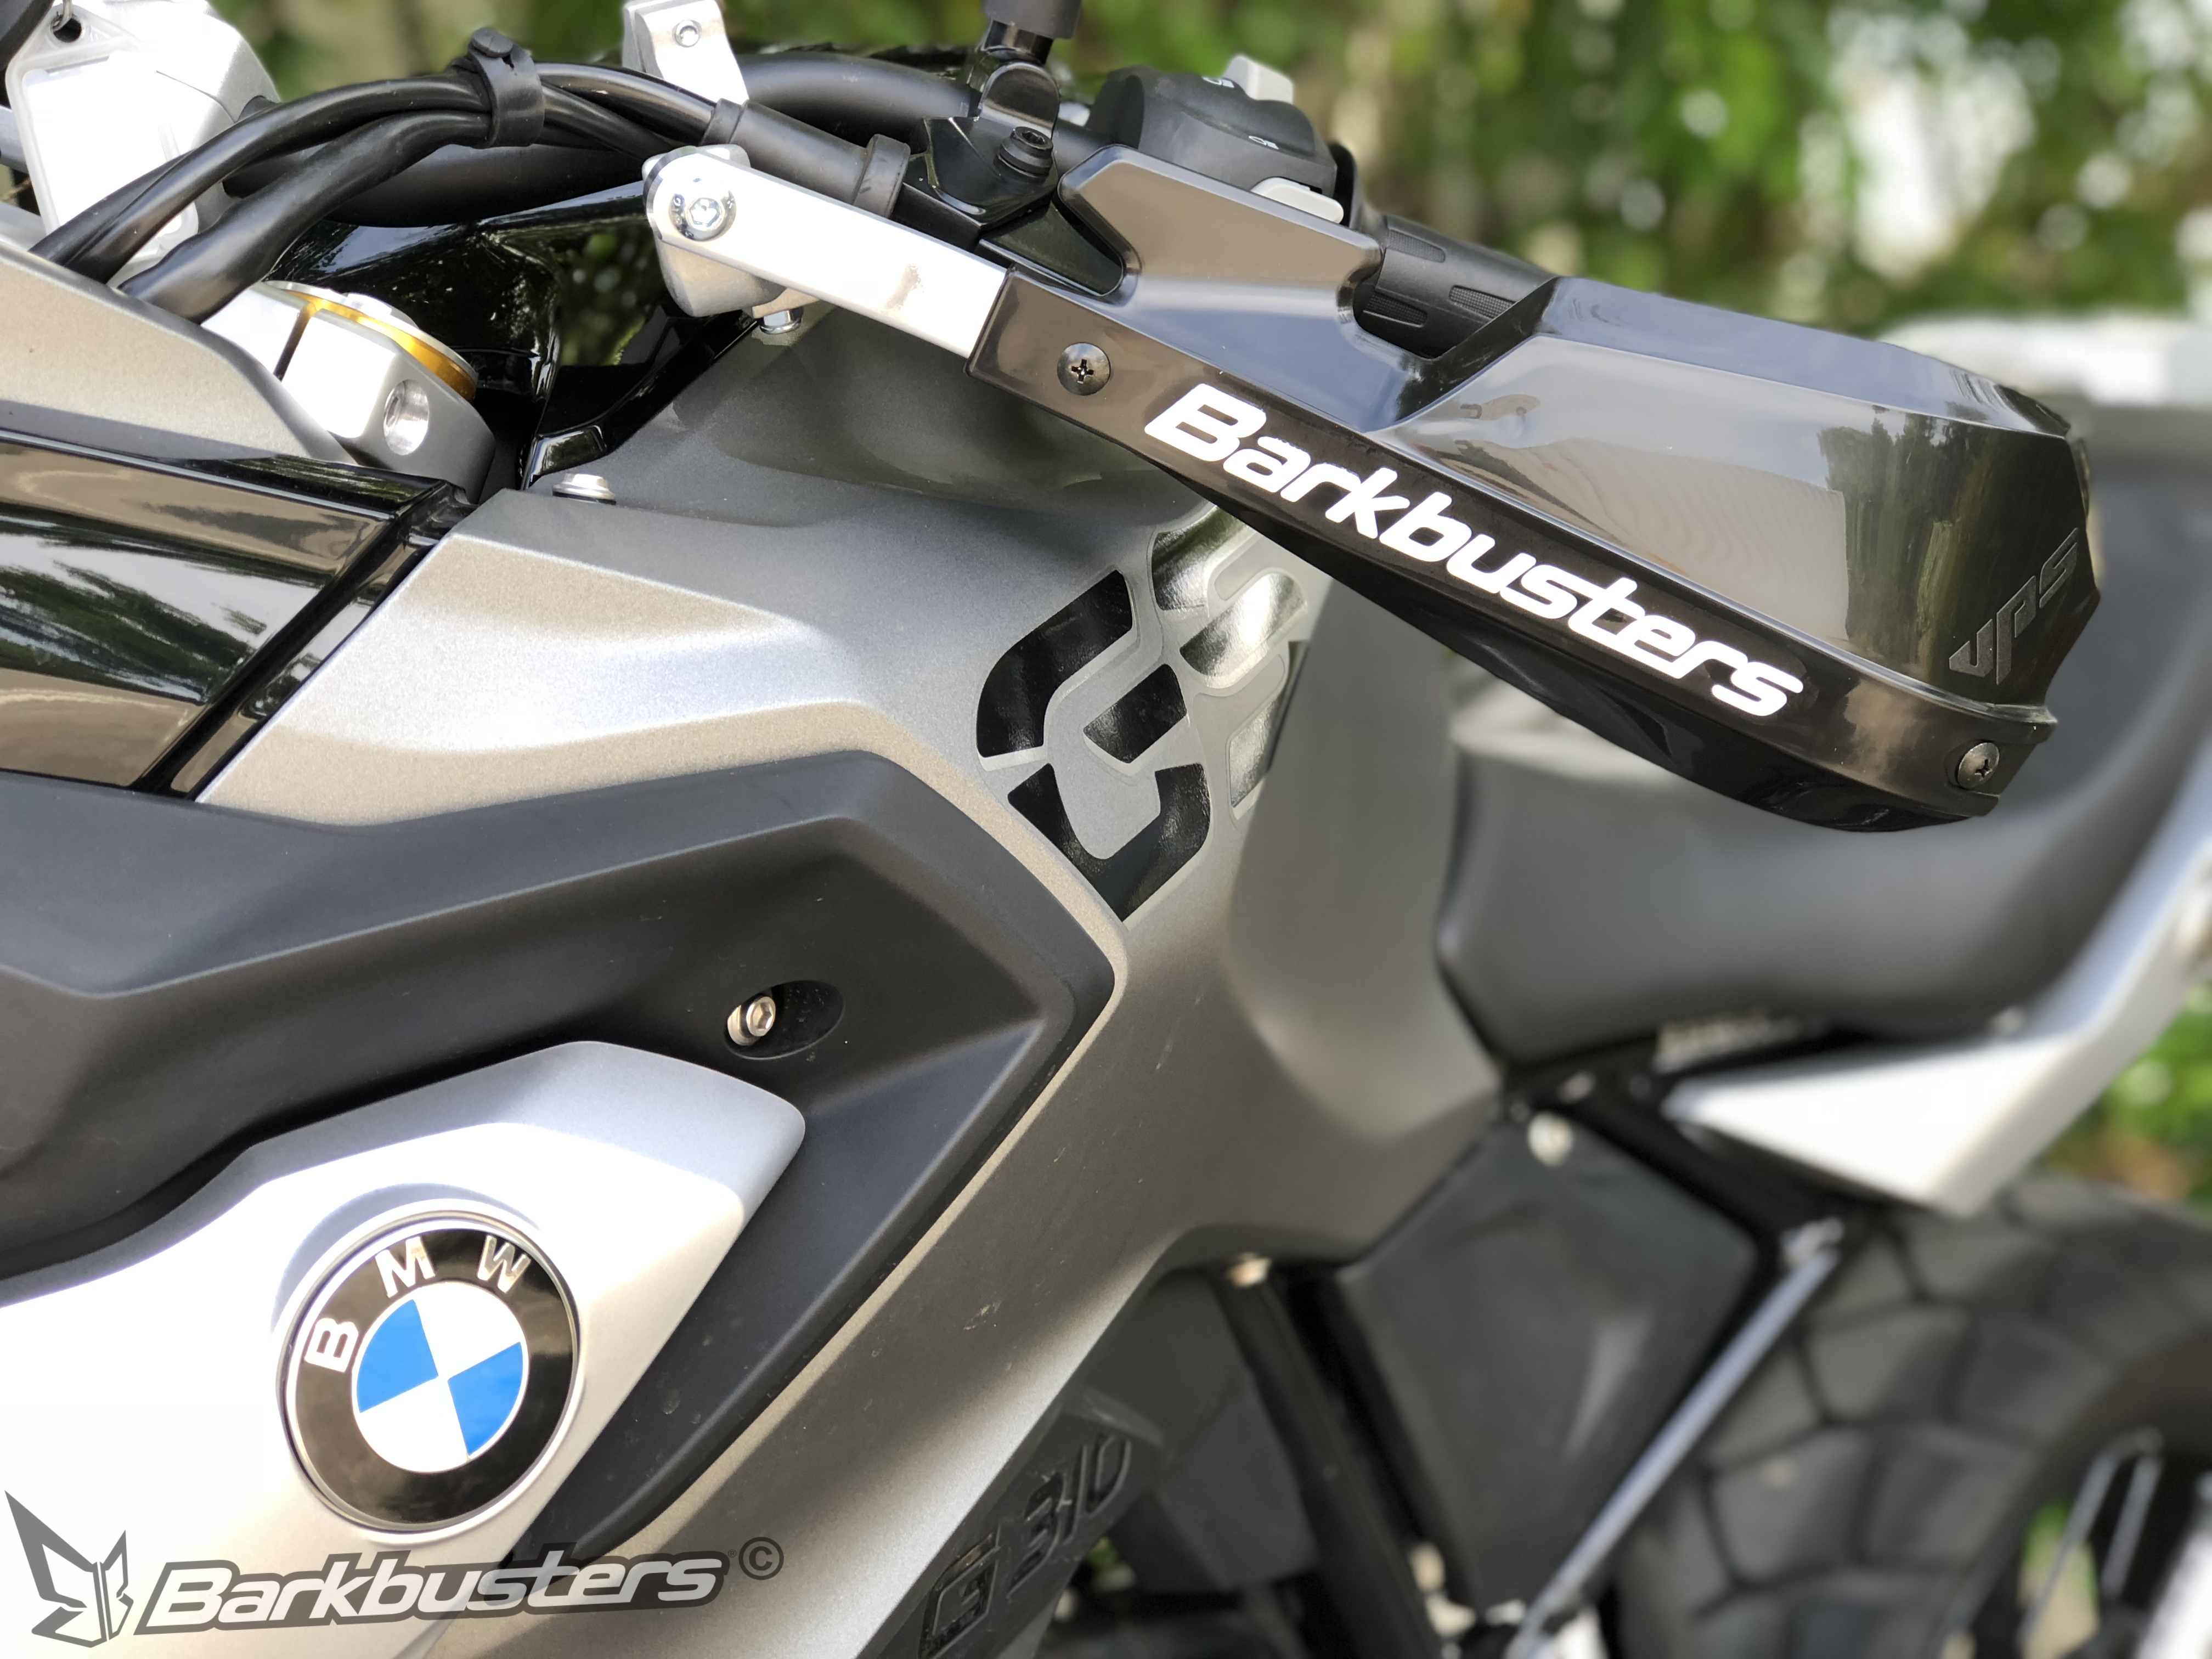 BARKBUSTERS Handguard Hardware Kit (Code: BHG-069)  fitted to BMW G310GS 2017 with VPS Guards (Code: VPS-003) sold separately